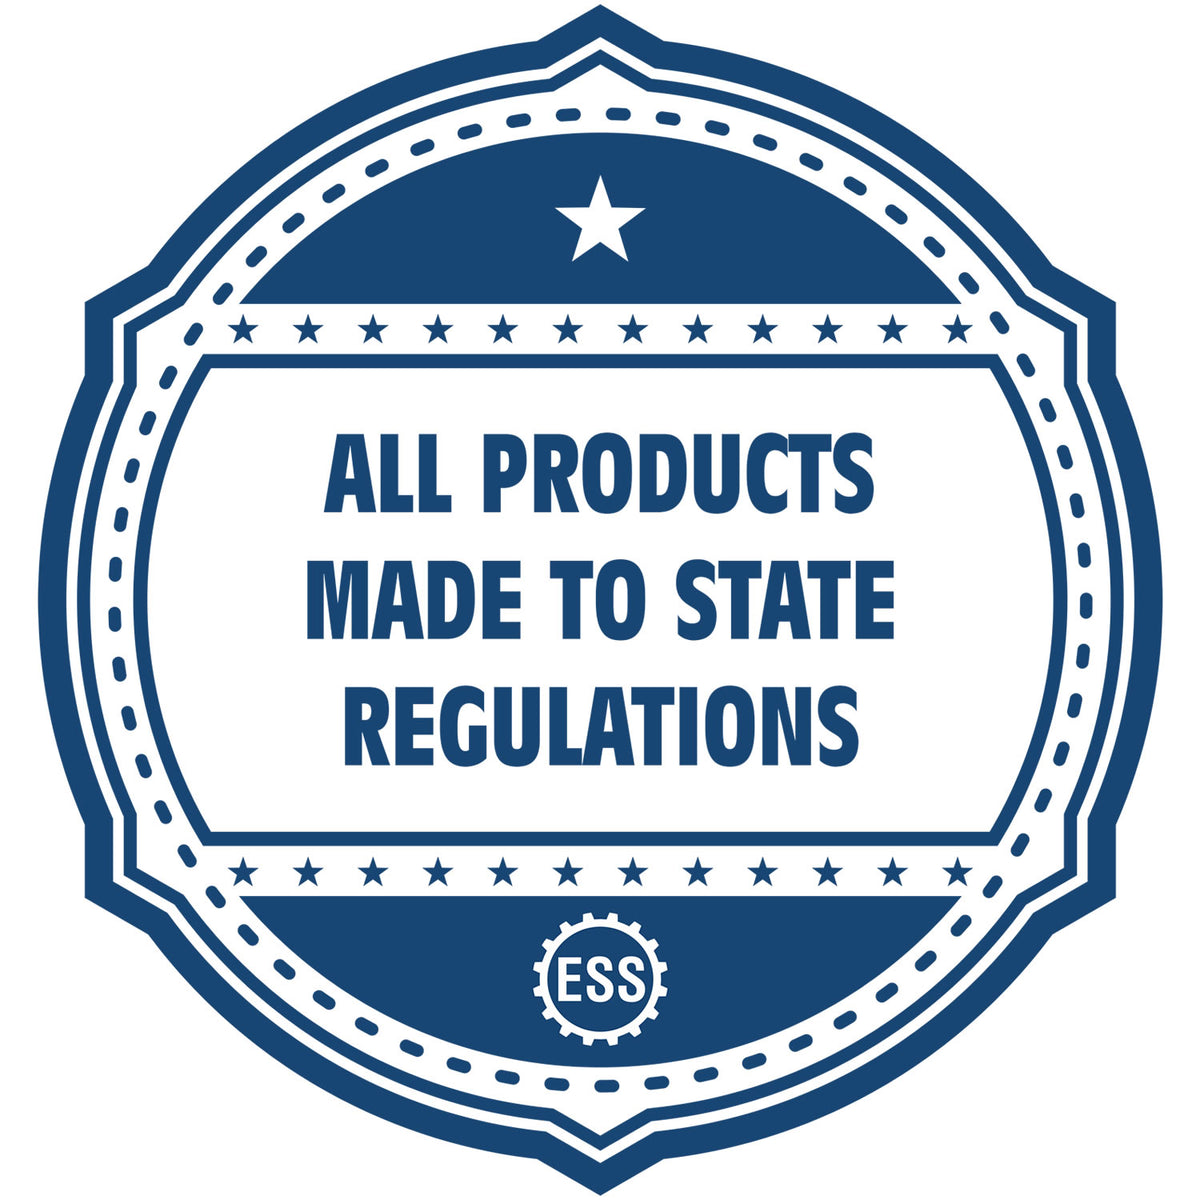 An icon or badge element for the PSI Louisiana Notary Stamp showing that this product is made in compliance with state regulations.